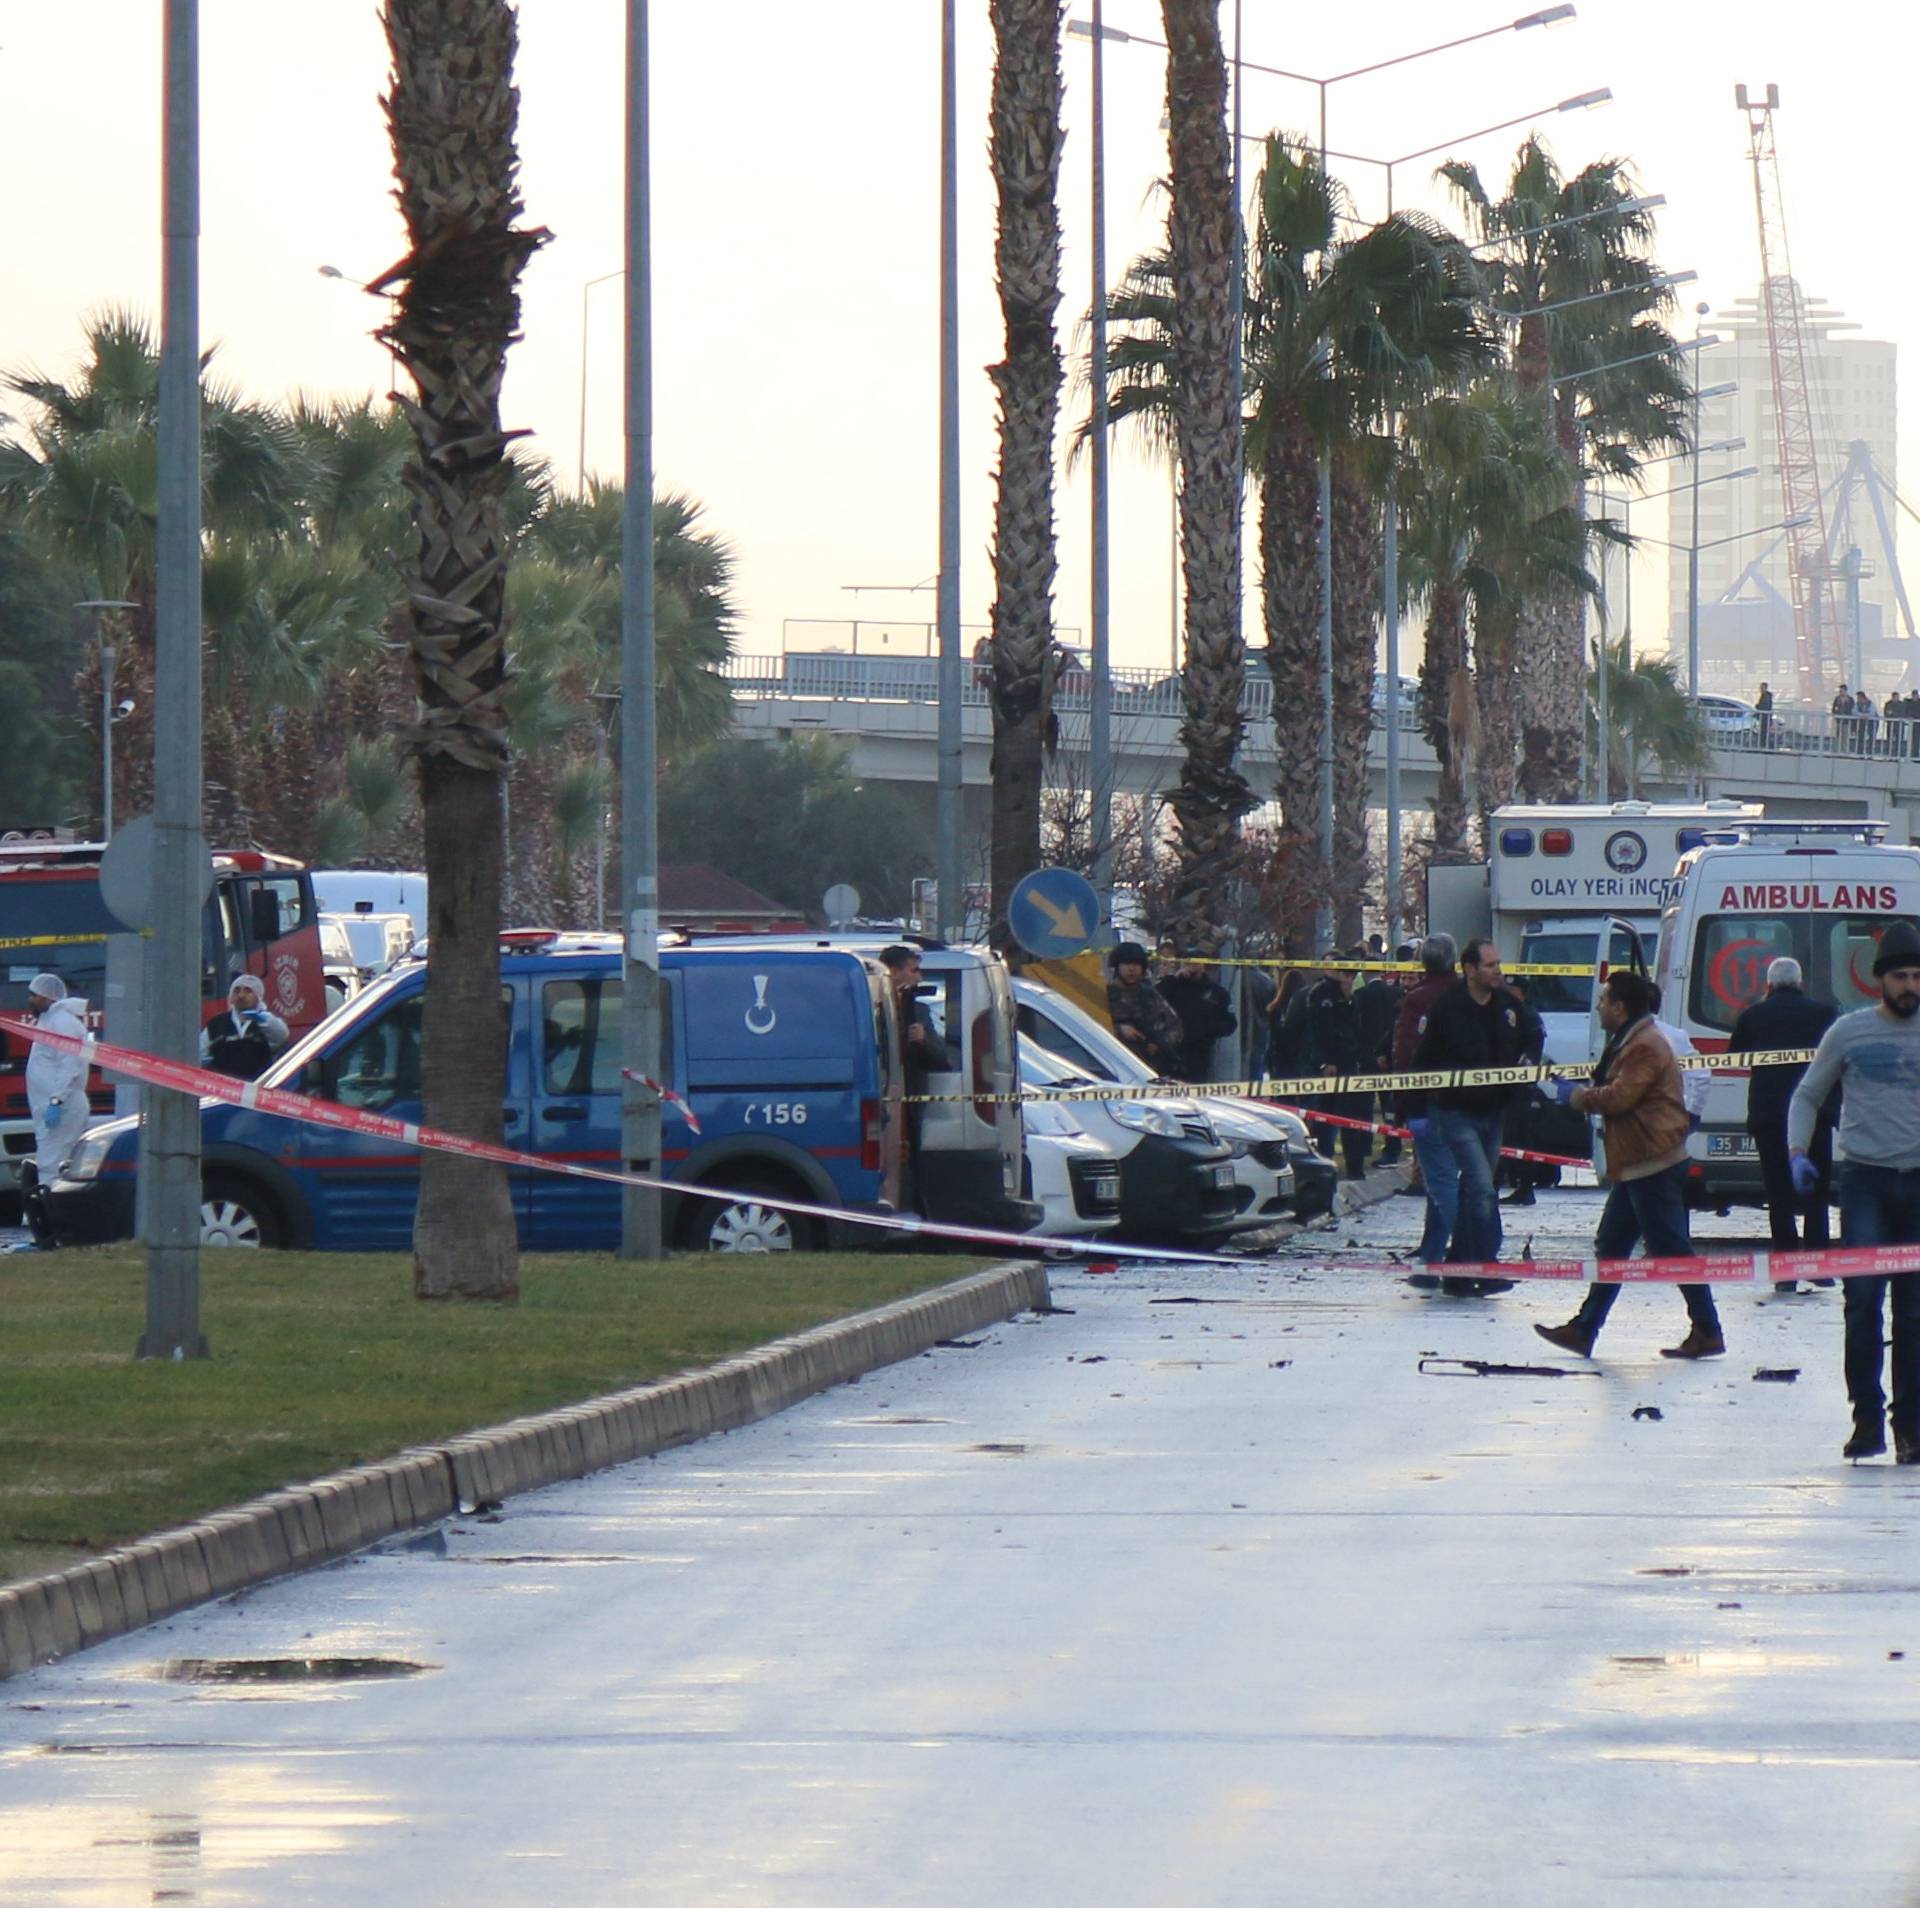 Police secure the area after an explosion outside a courthouse in Izmir